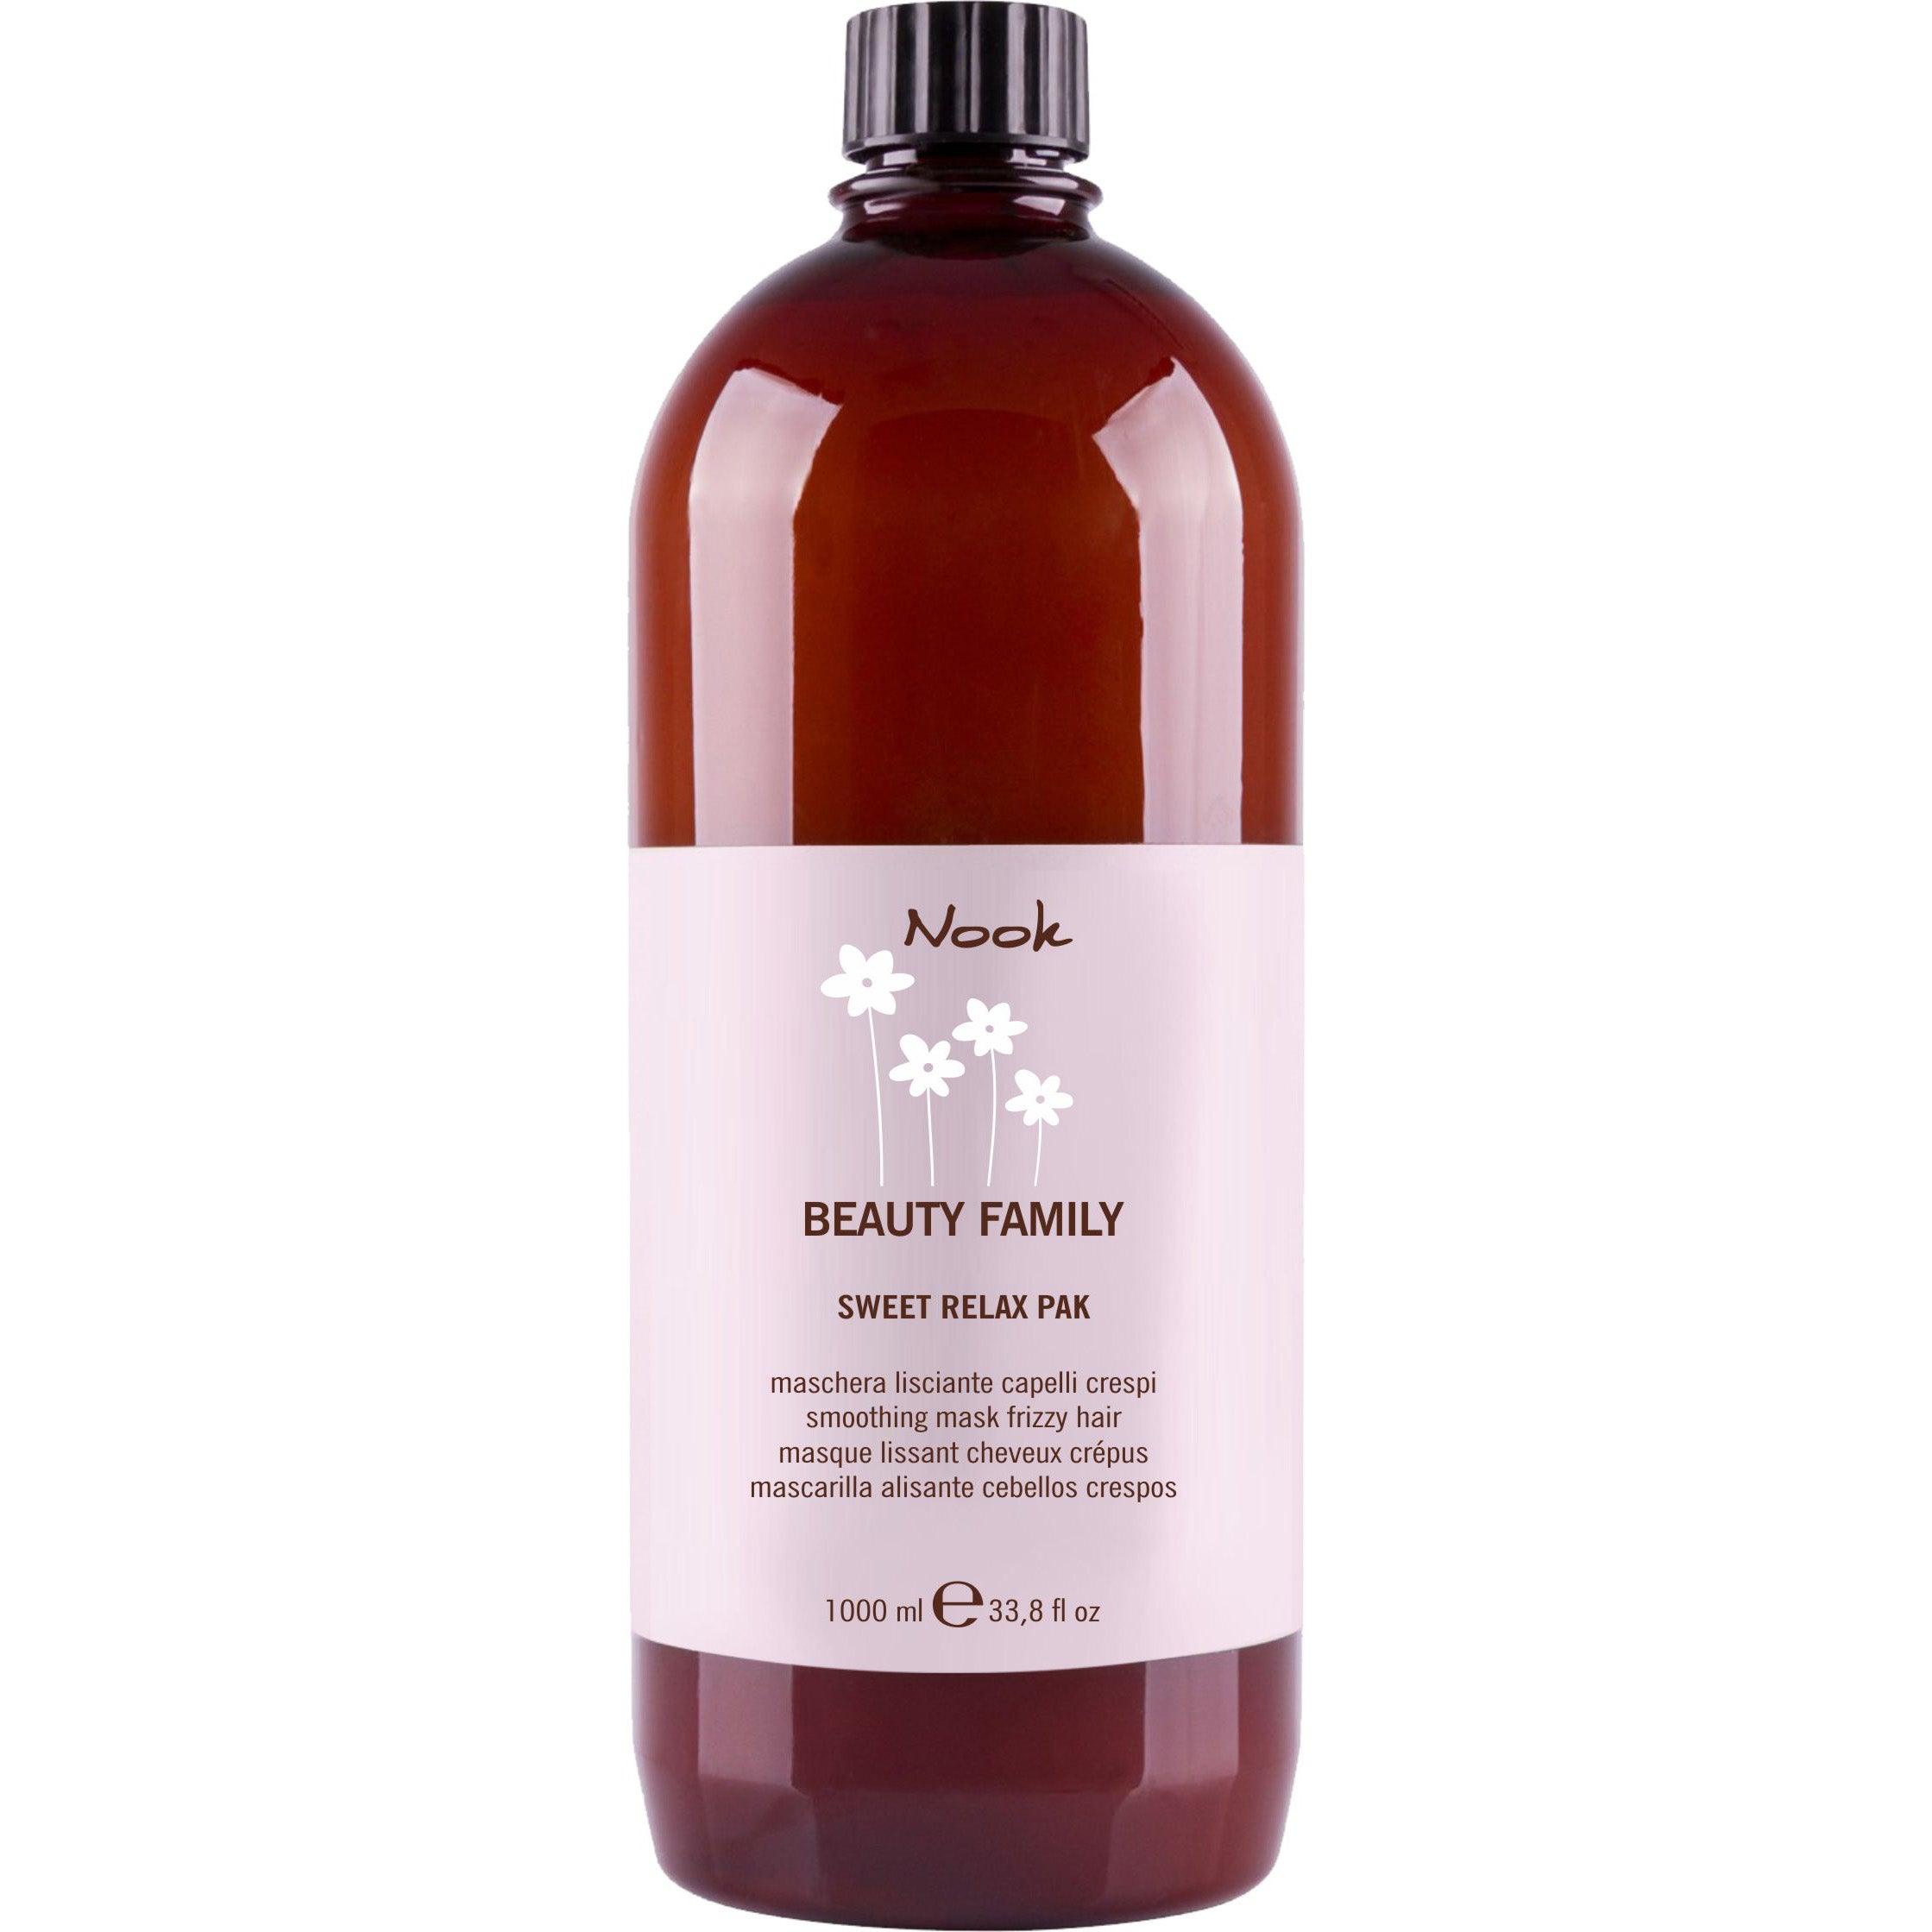 Nook Beauty Family Sweet Relax Pax 1000ml - Nook